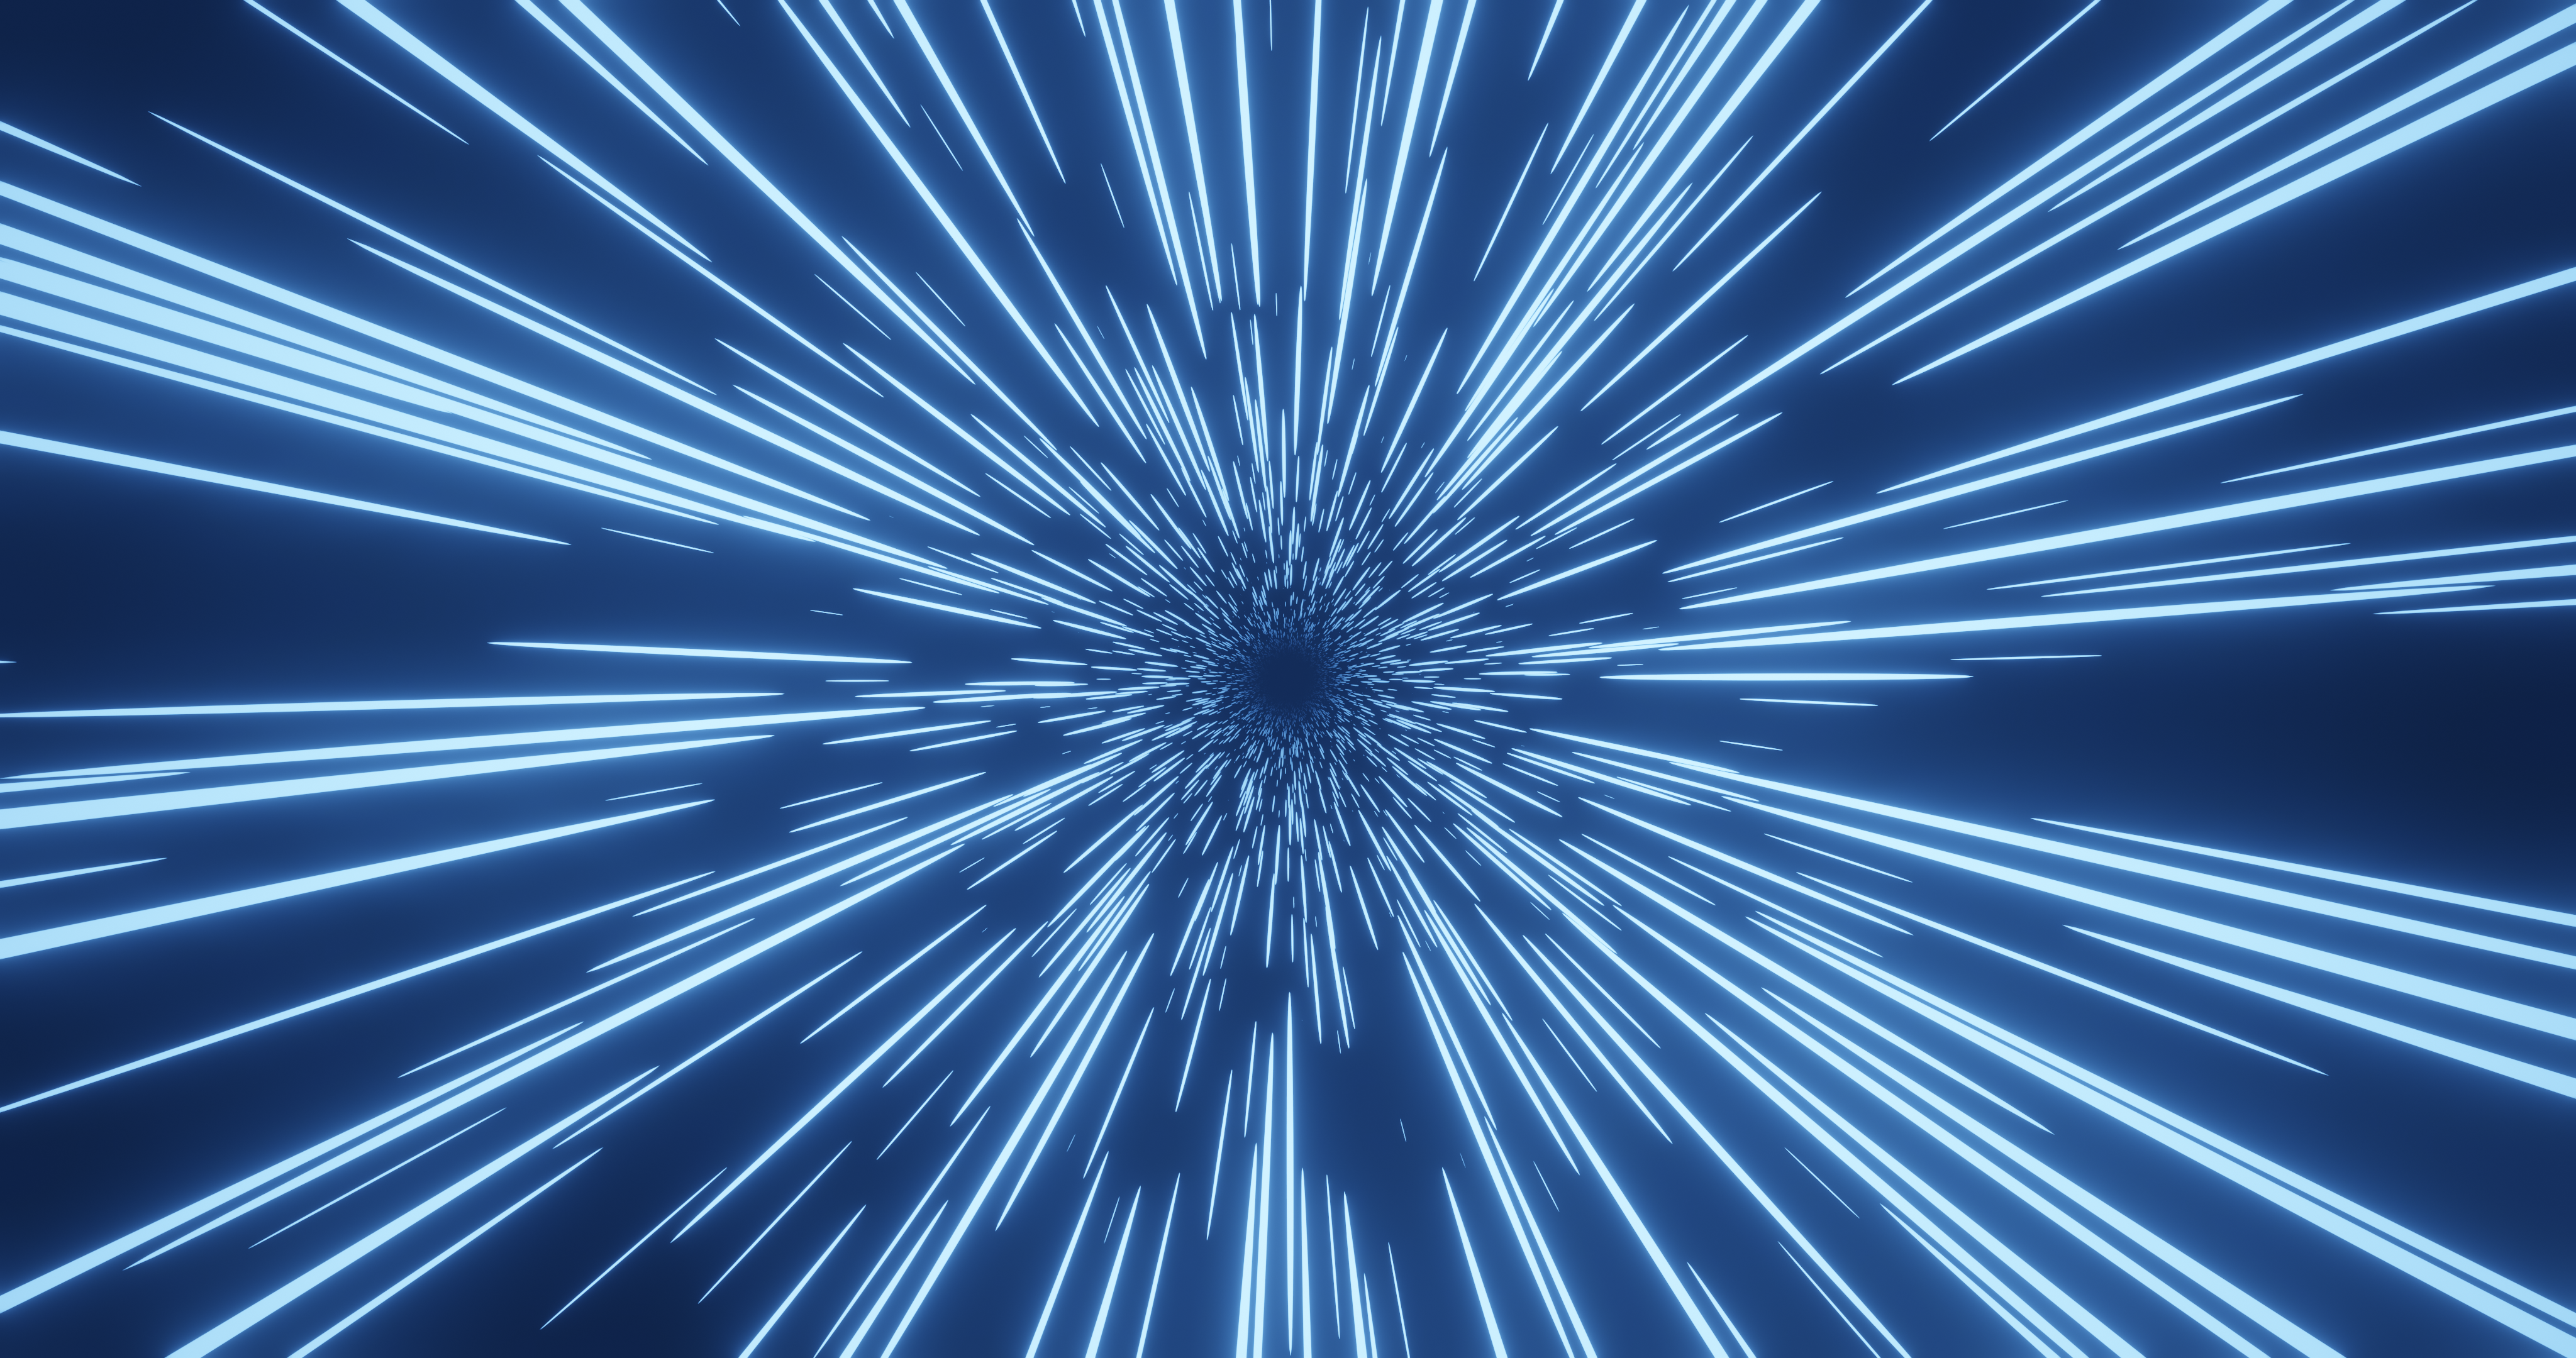 Hyperspace Images  Free Download on Freepik